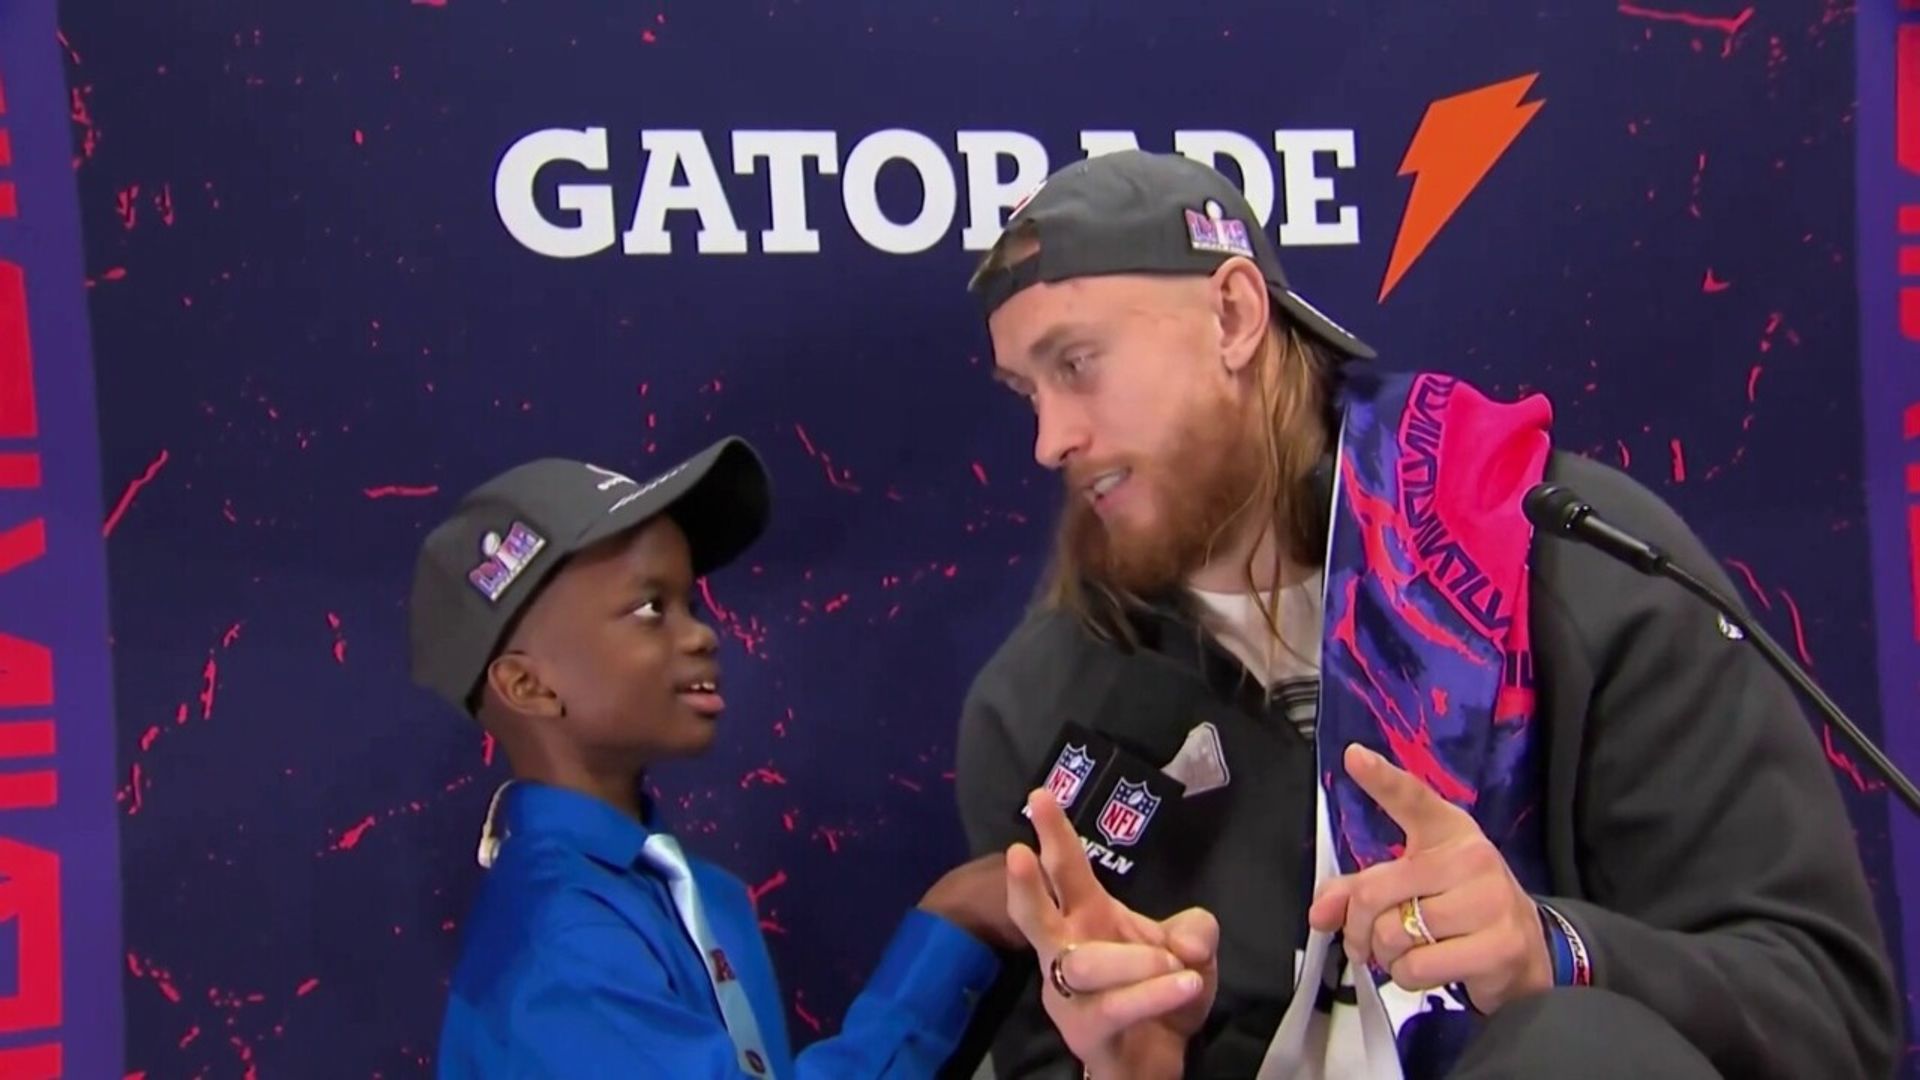 11-year-old reporter grills NFL stars ahead of Super Bowl!